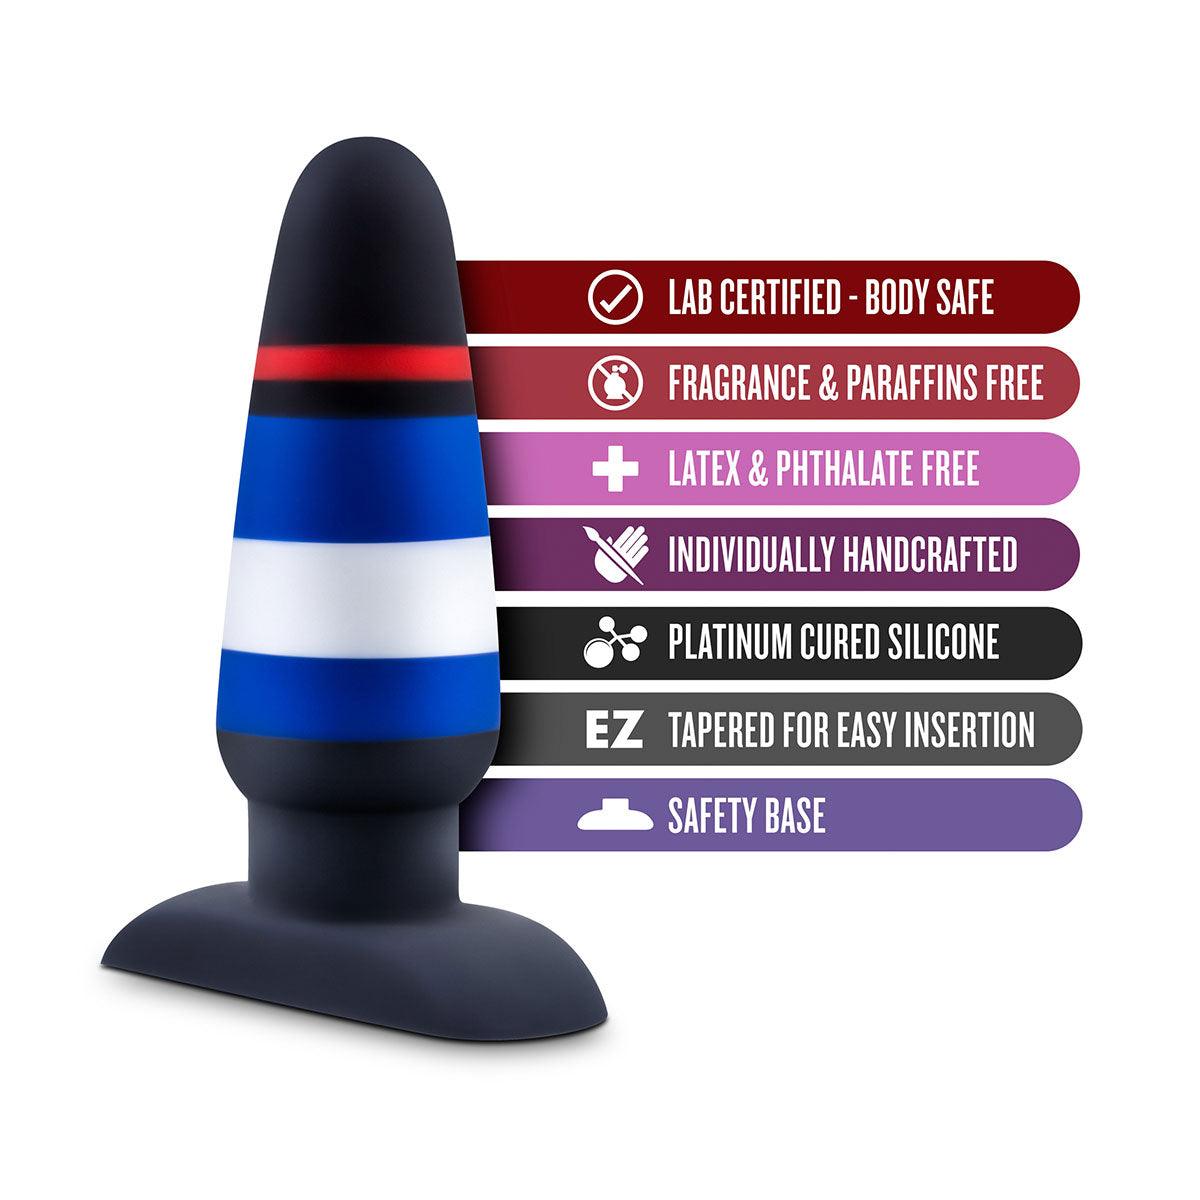 Avant Pride P4 - Power Play - Buy At Luxury Toy X - Free 3-Day Shipping